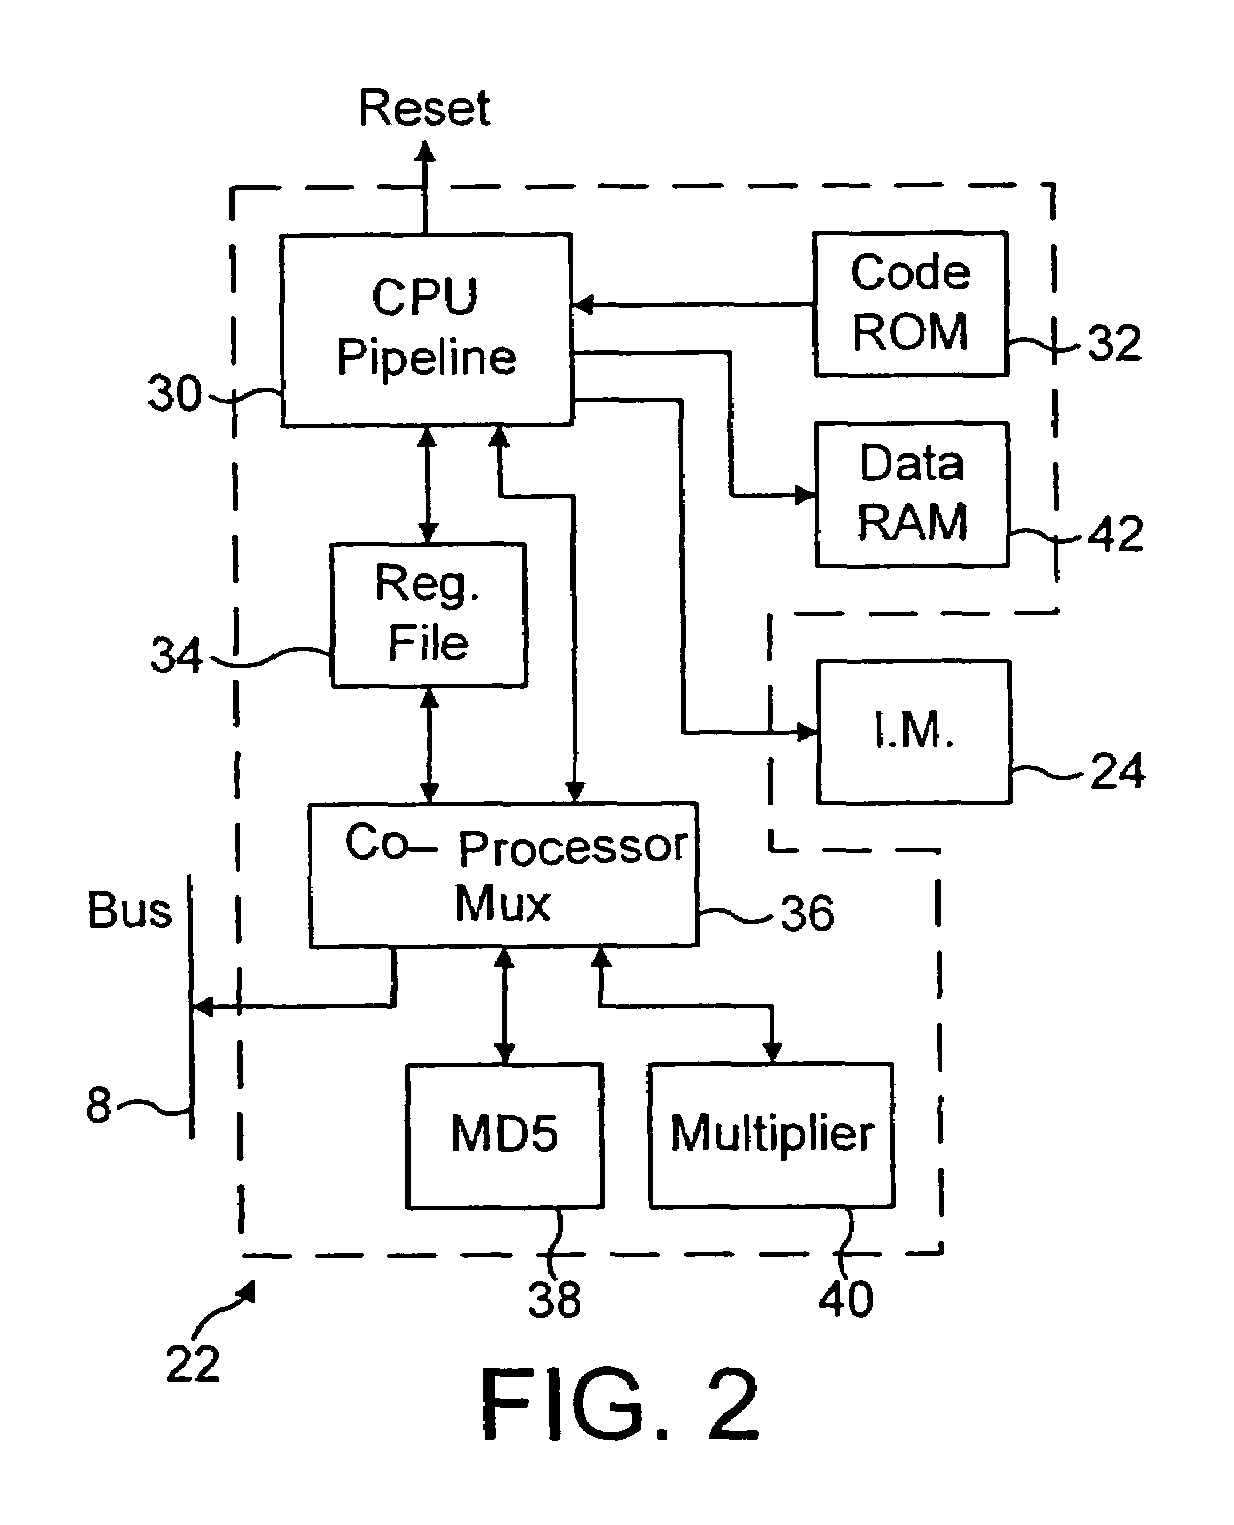 Memory security device for flexible software environment